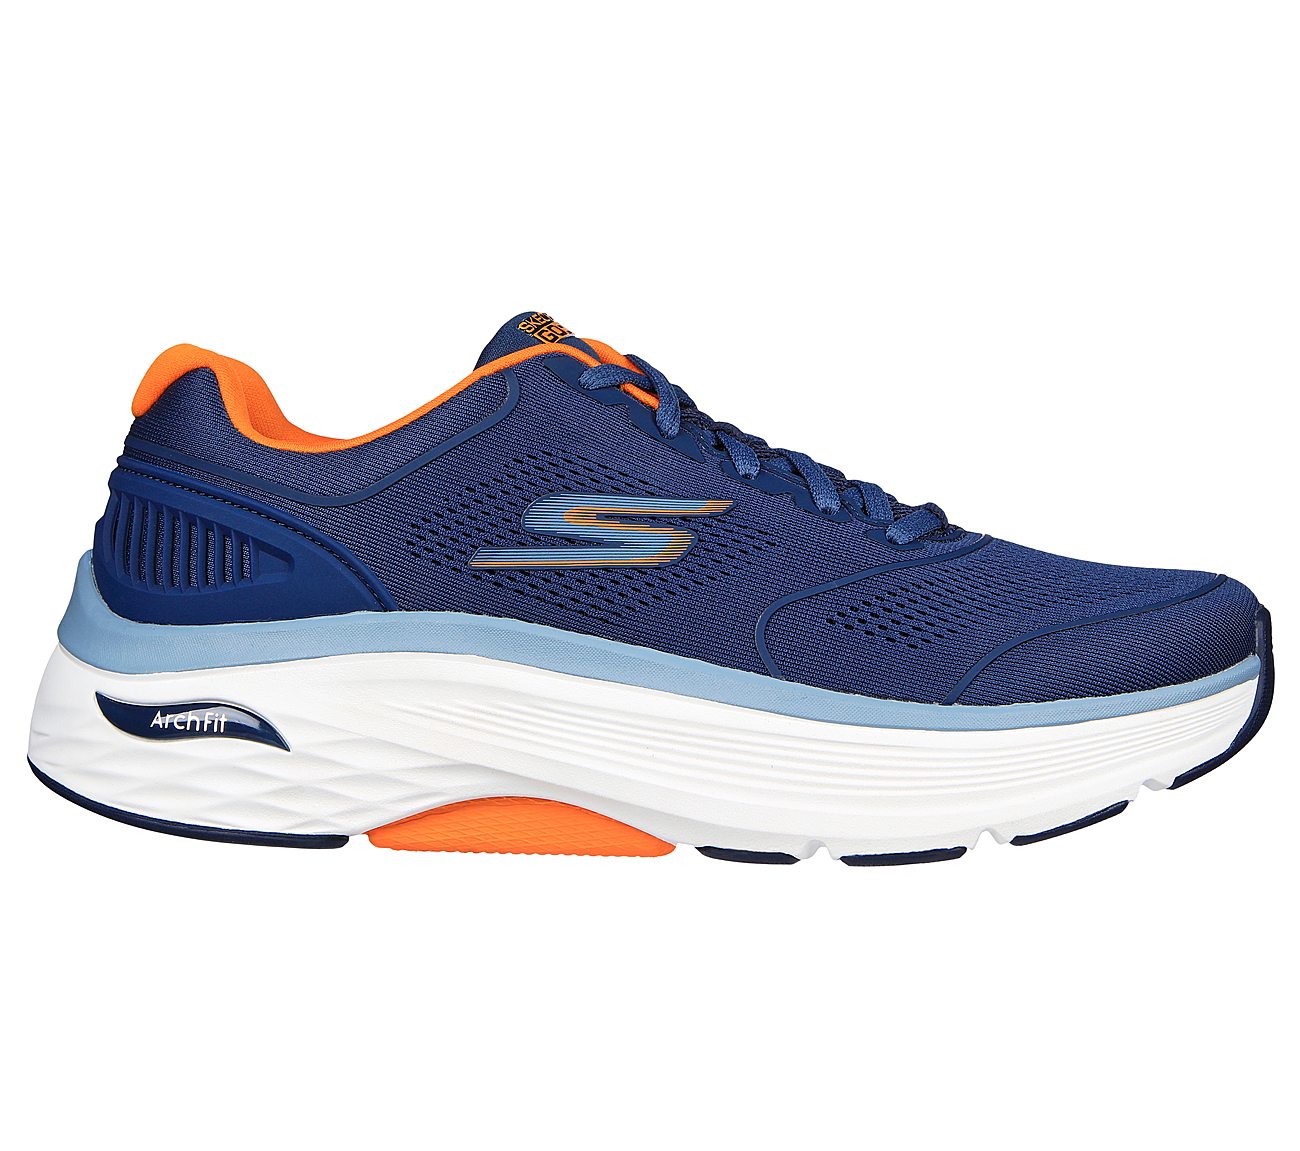 MAX CUSHIONING ARCH FIT - SWI, NAVY/ORANGE Footwear Lateral View